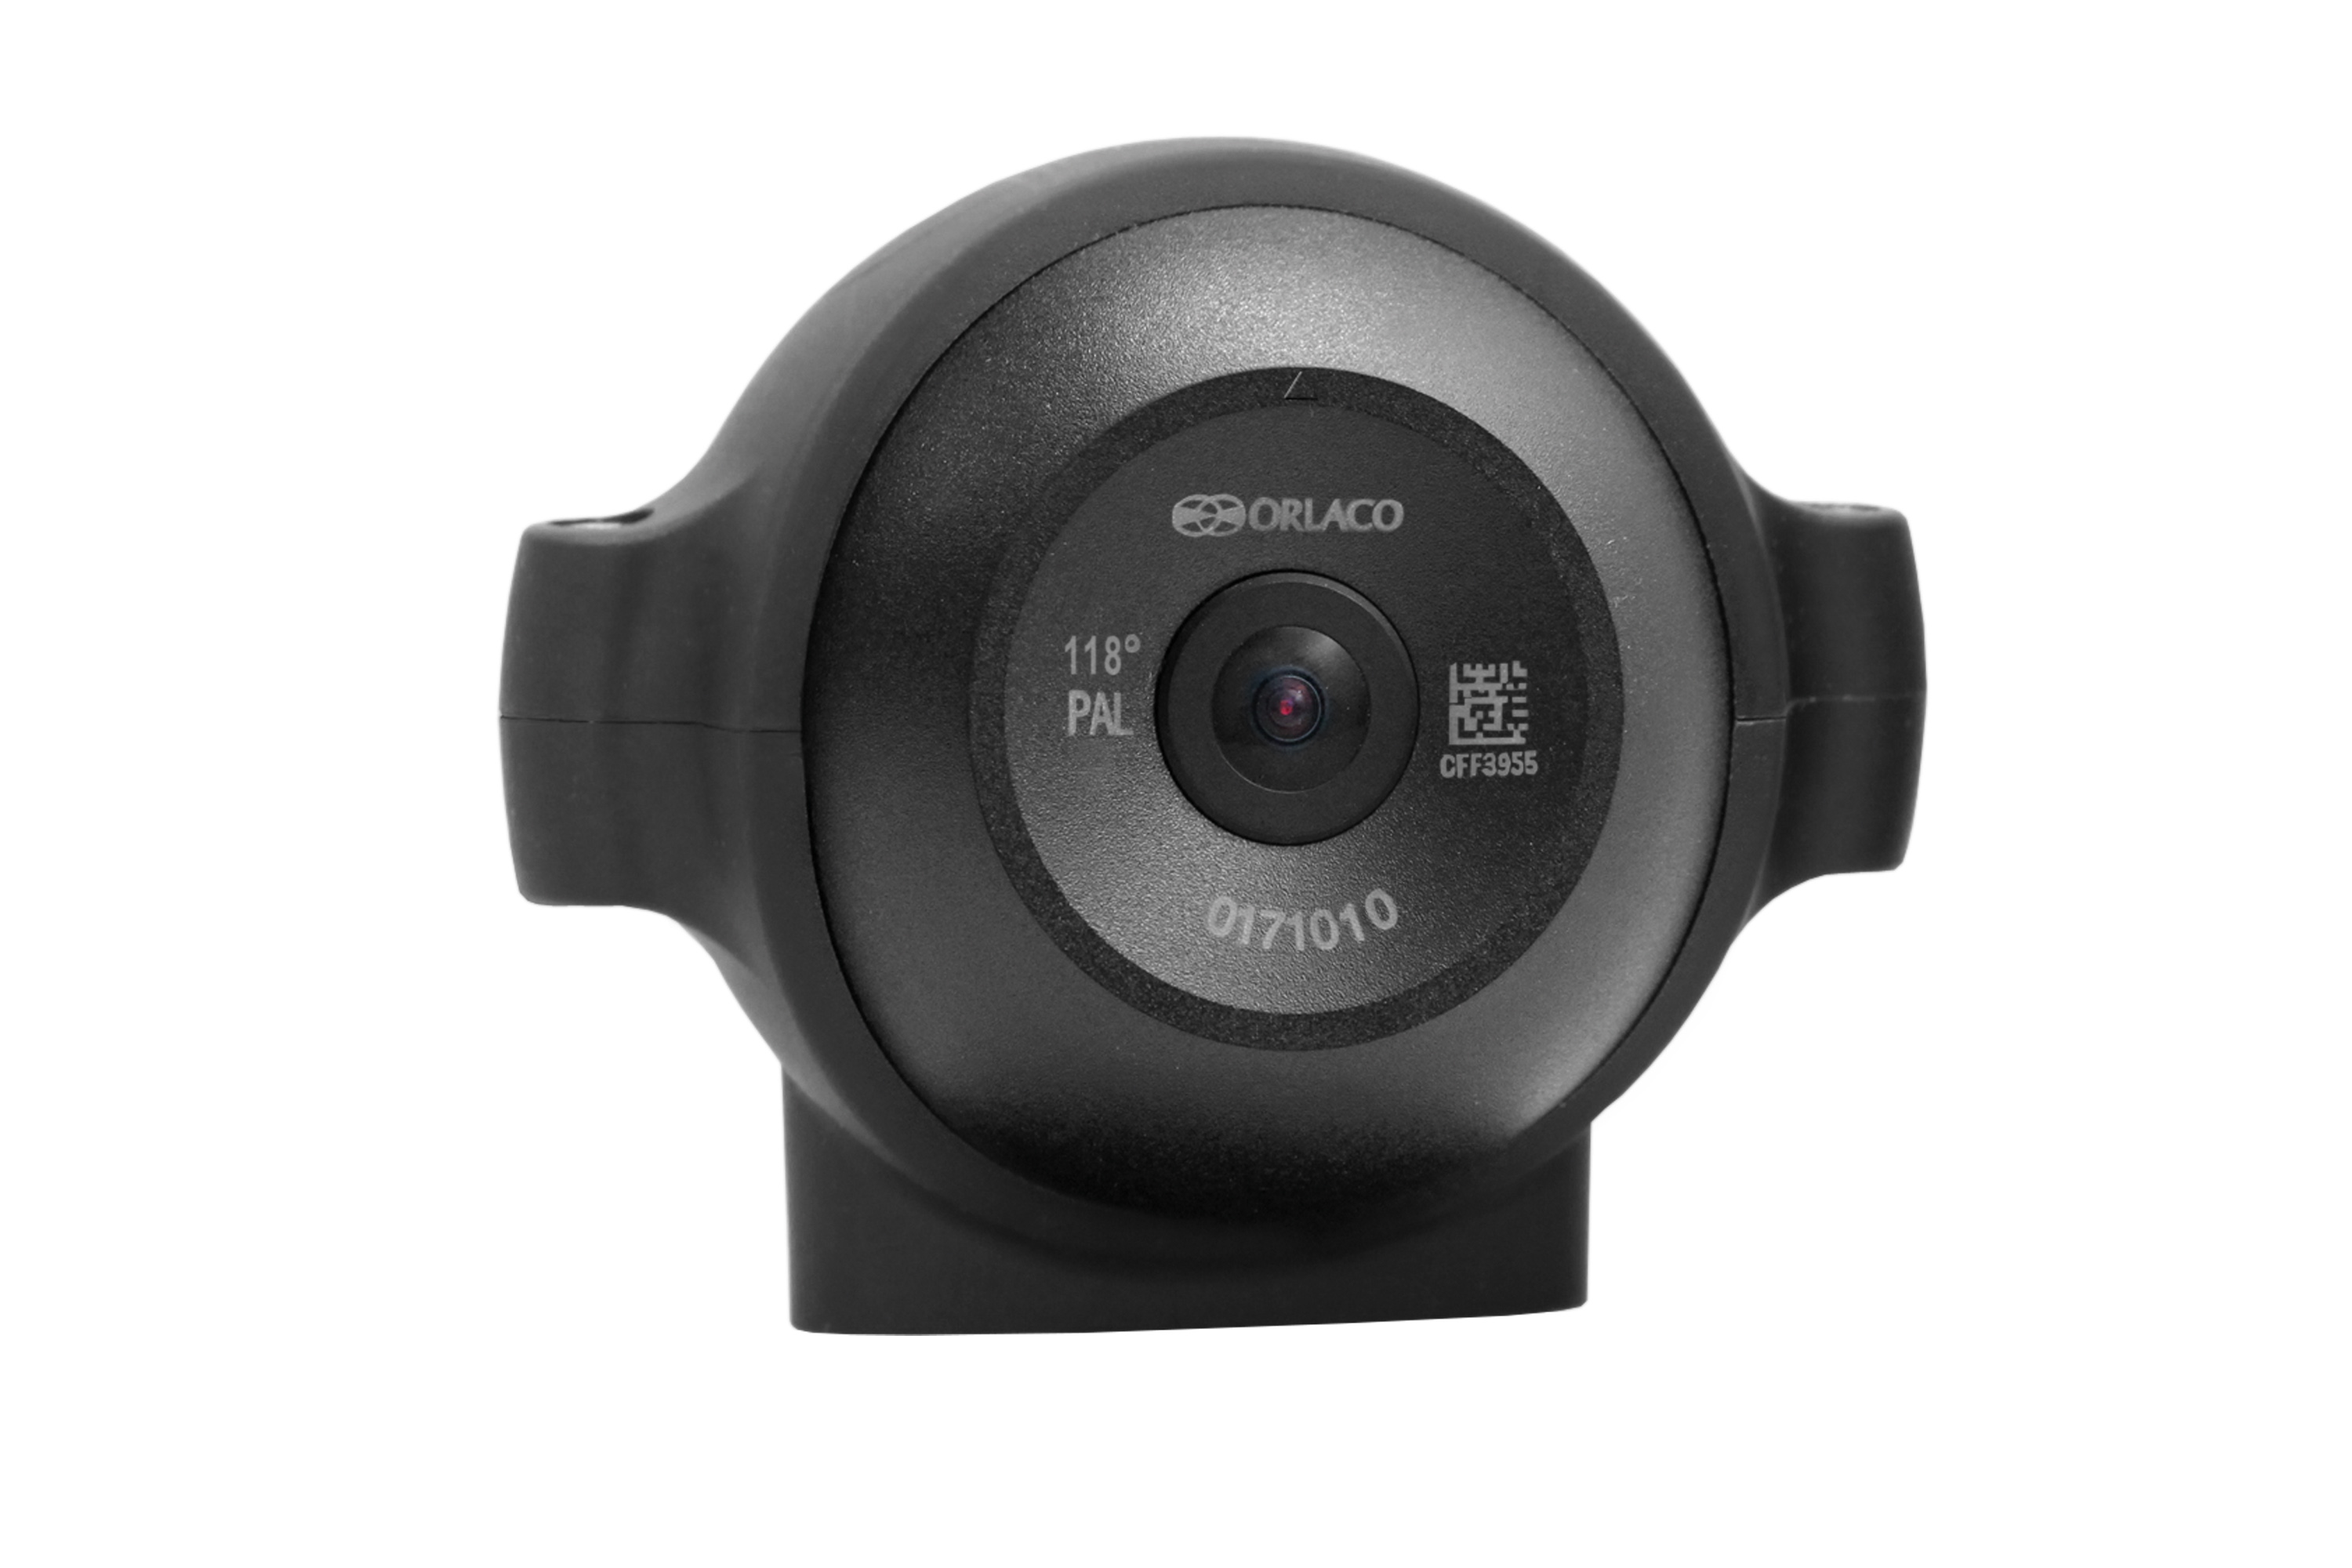 Afbeelding Orlaco FAMOS Compact camera 118º PAL productcode 0171010